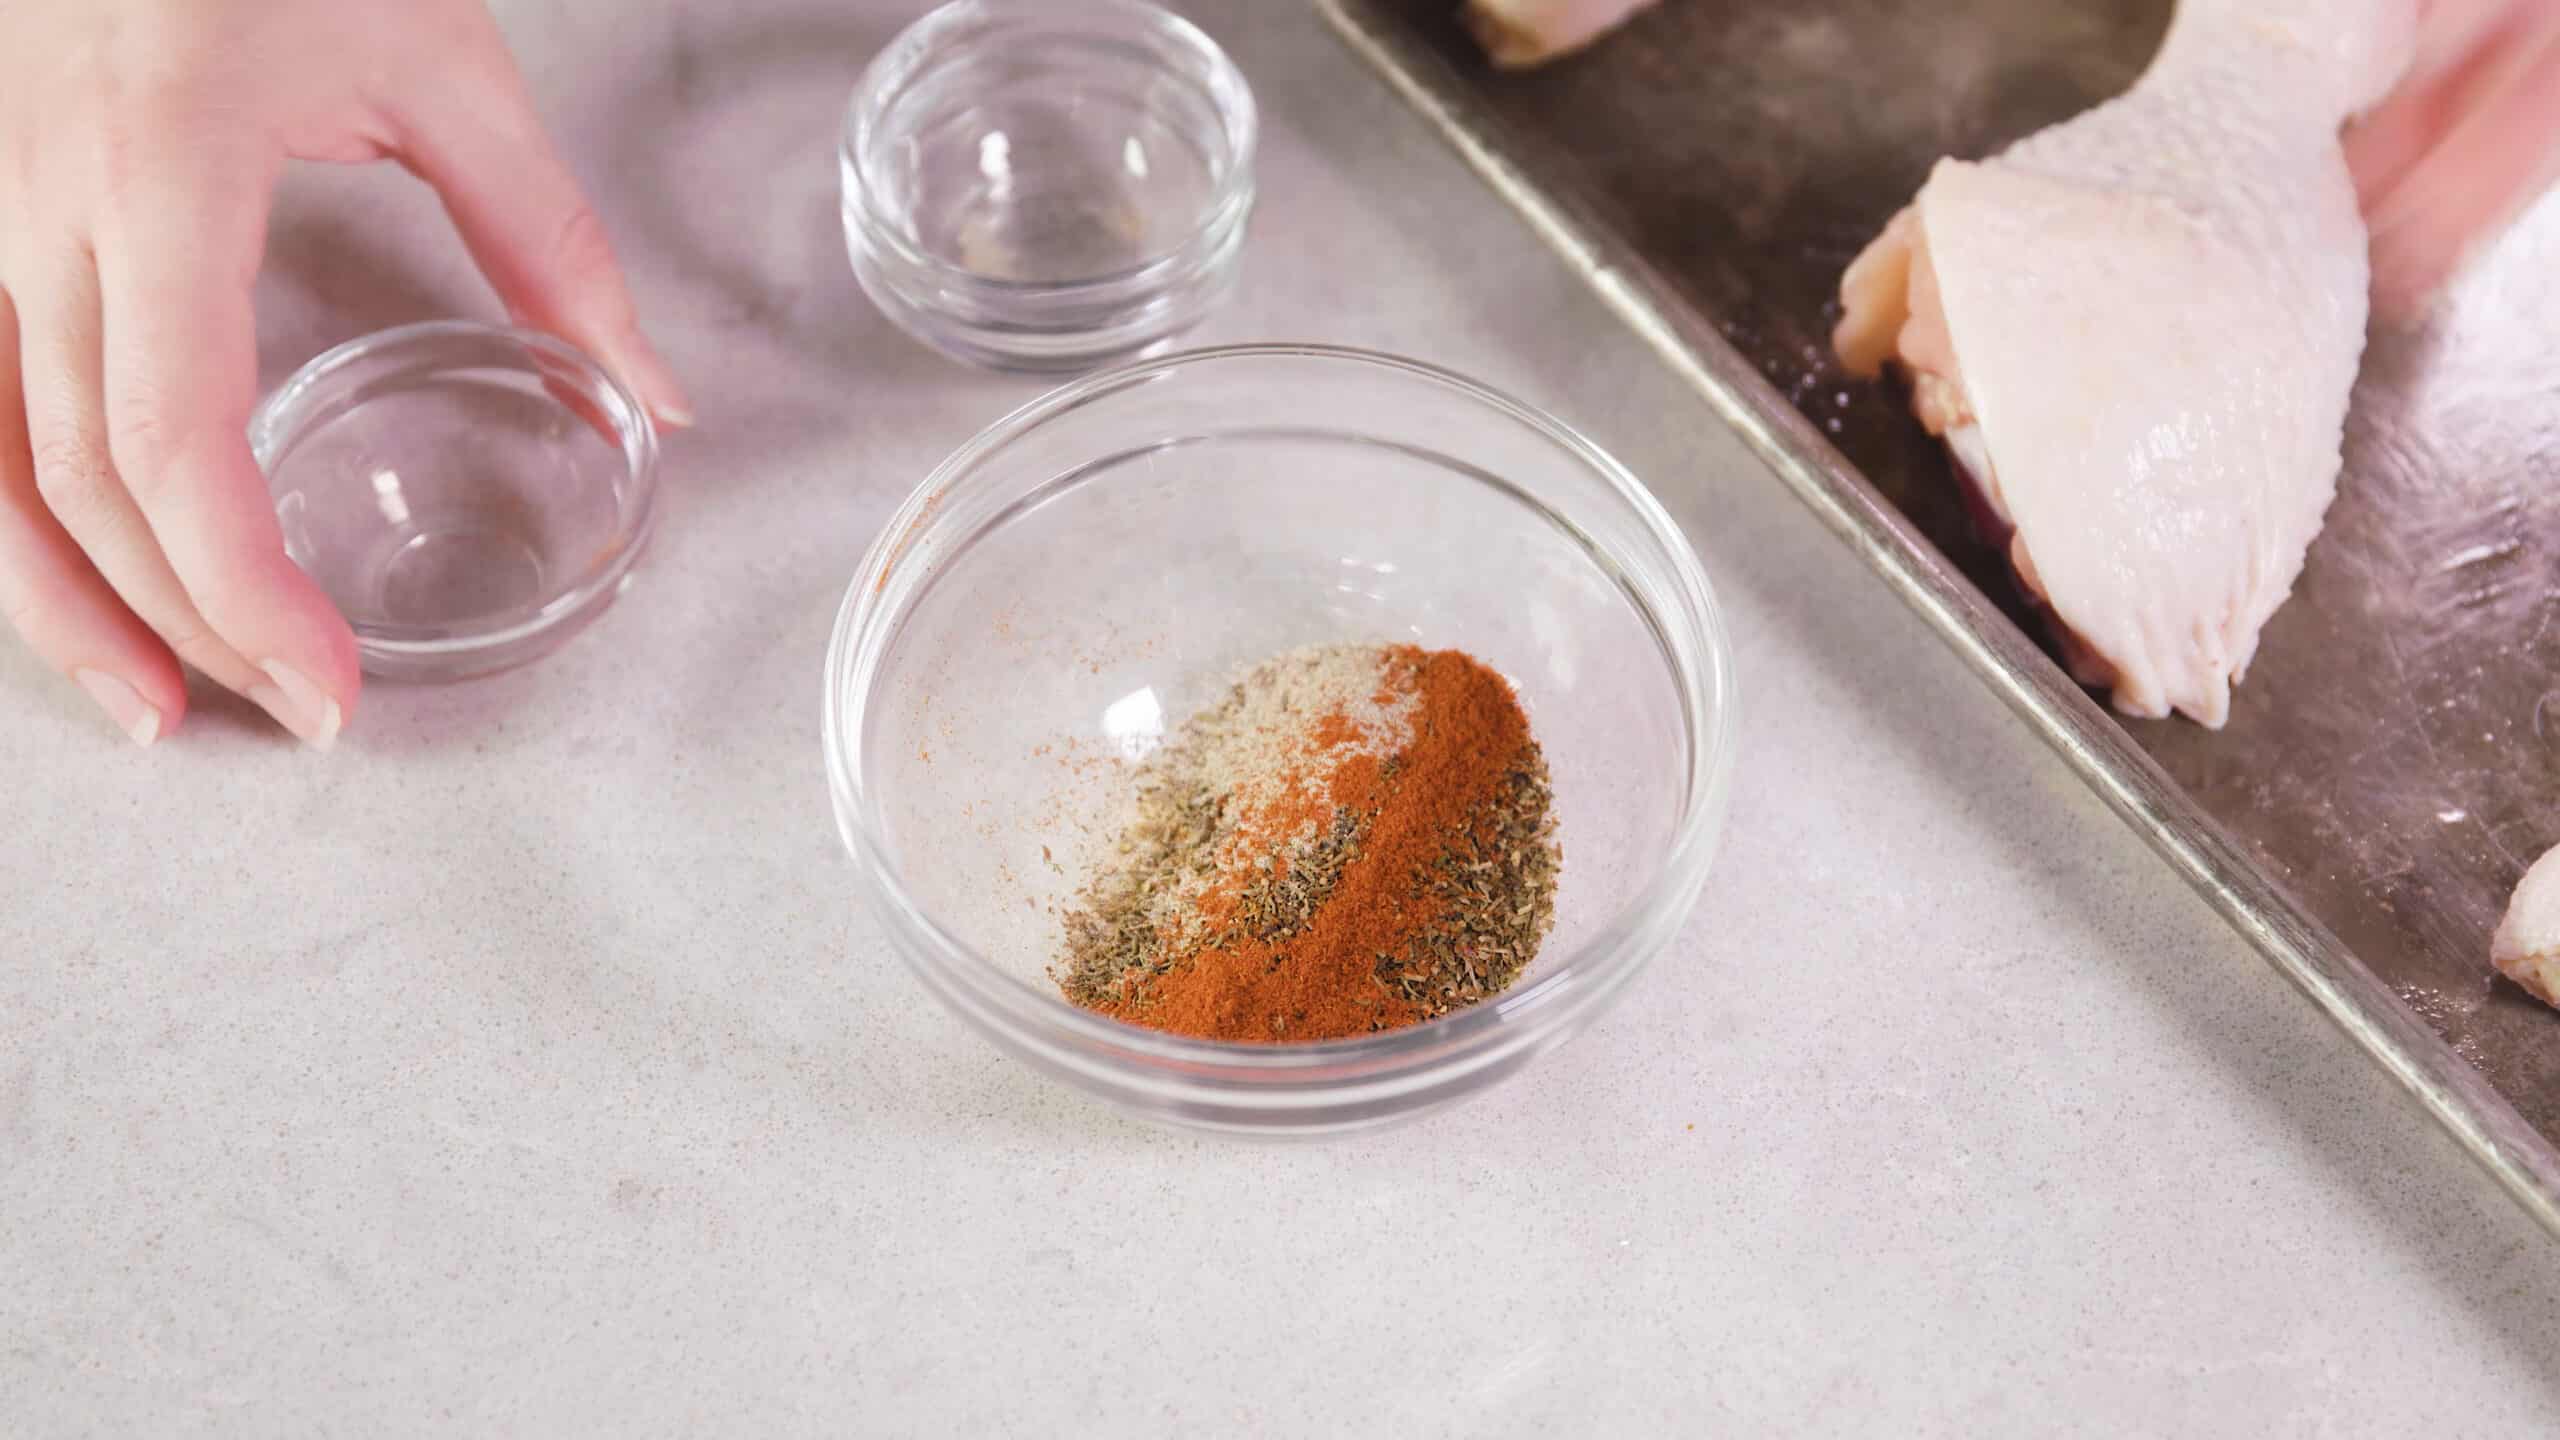 Angled view of a clear glass mixing bowl filled with dry cajun spices mixed together ready to add to the chicken which is at the ready on a metal baking sheet to the right.